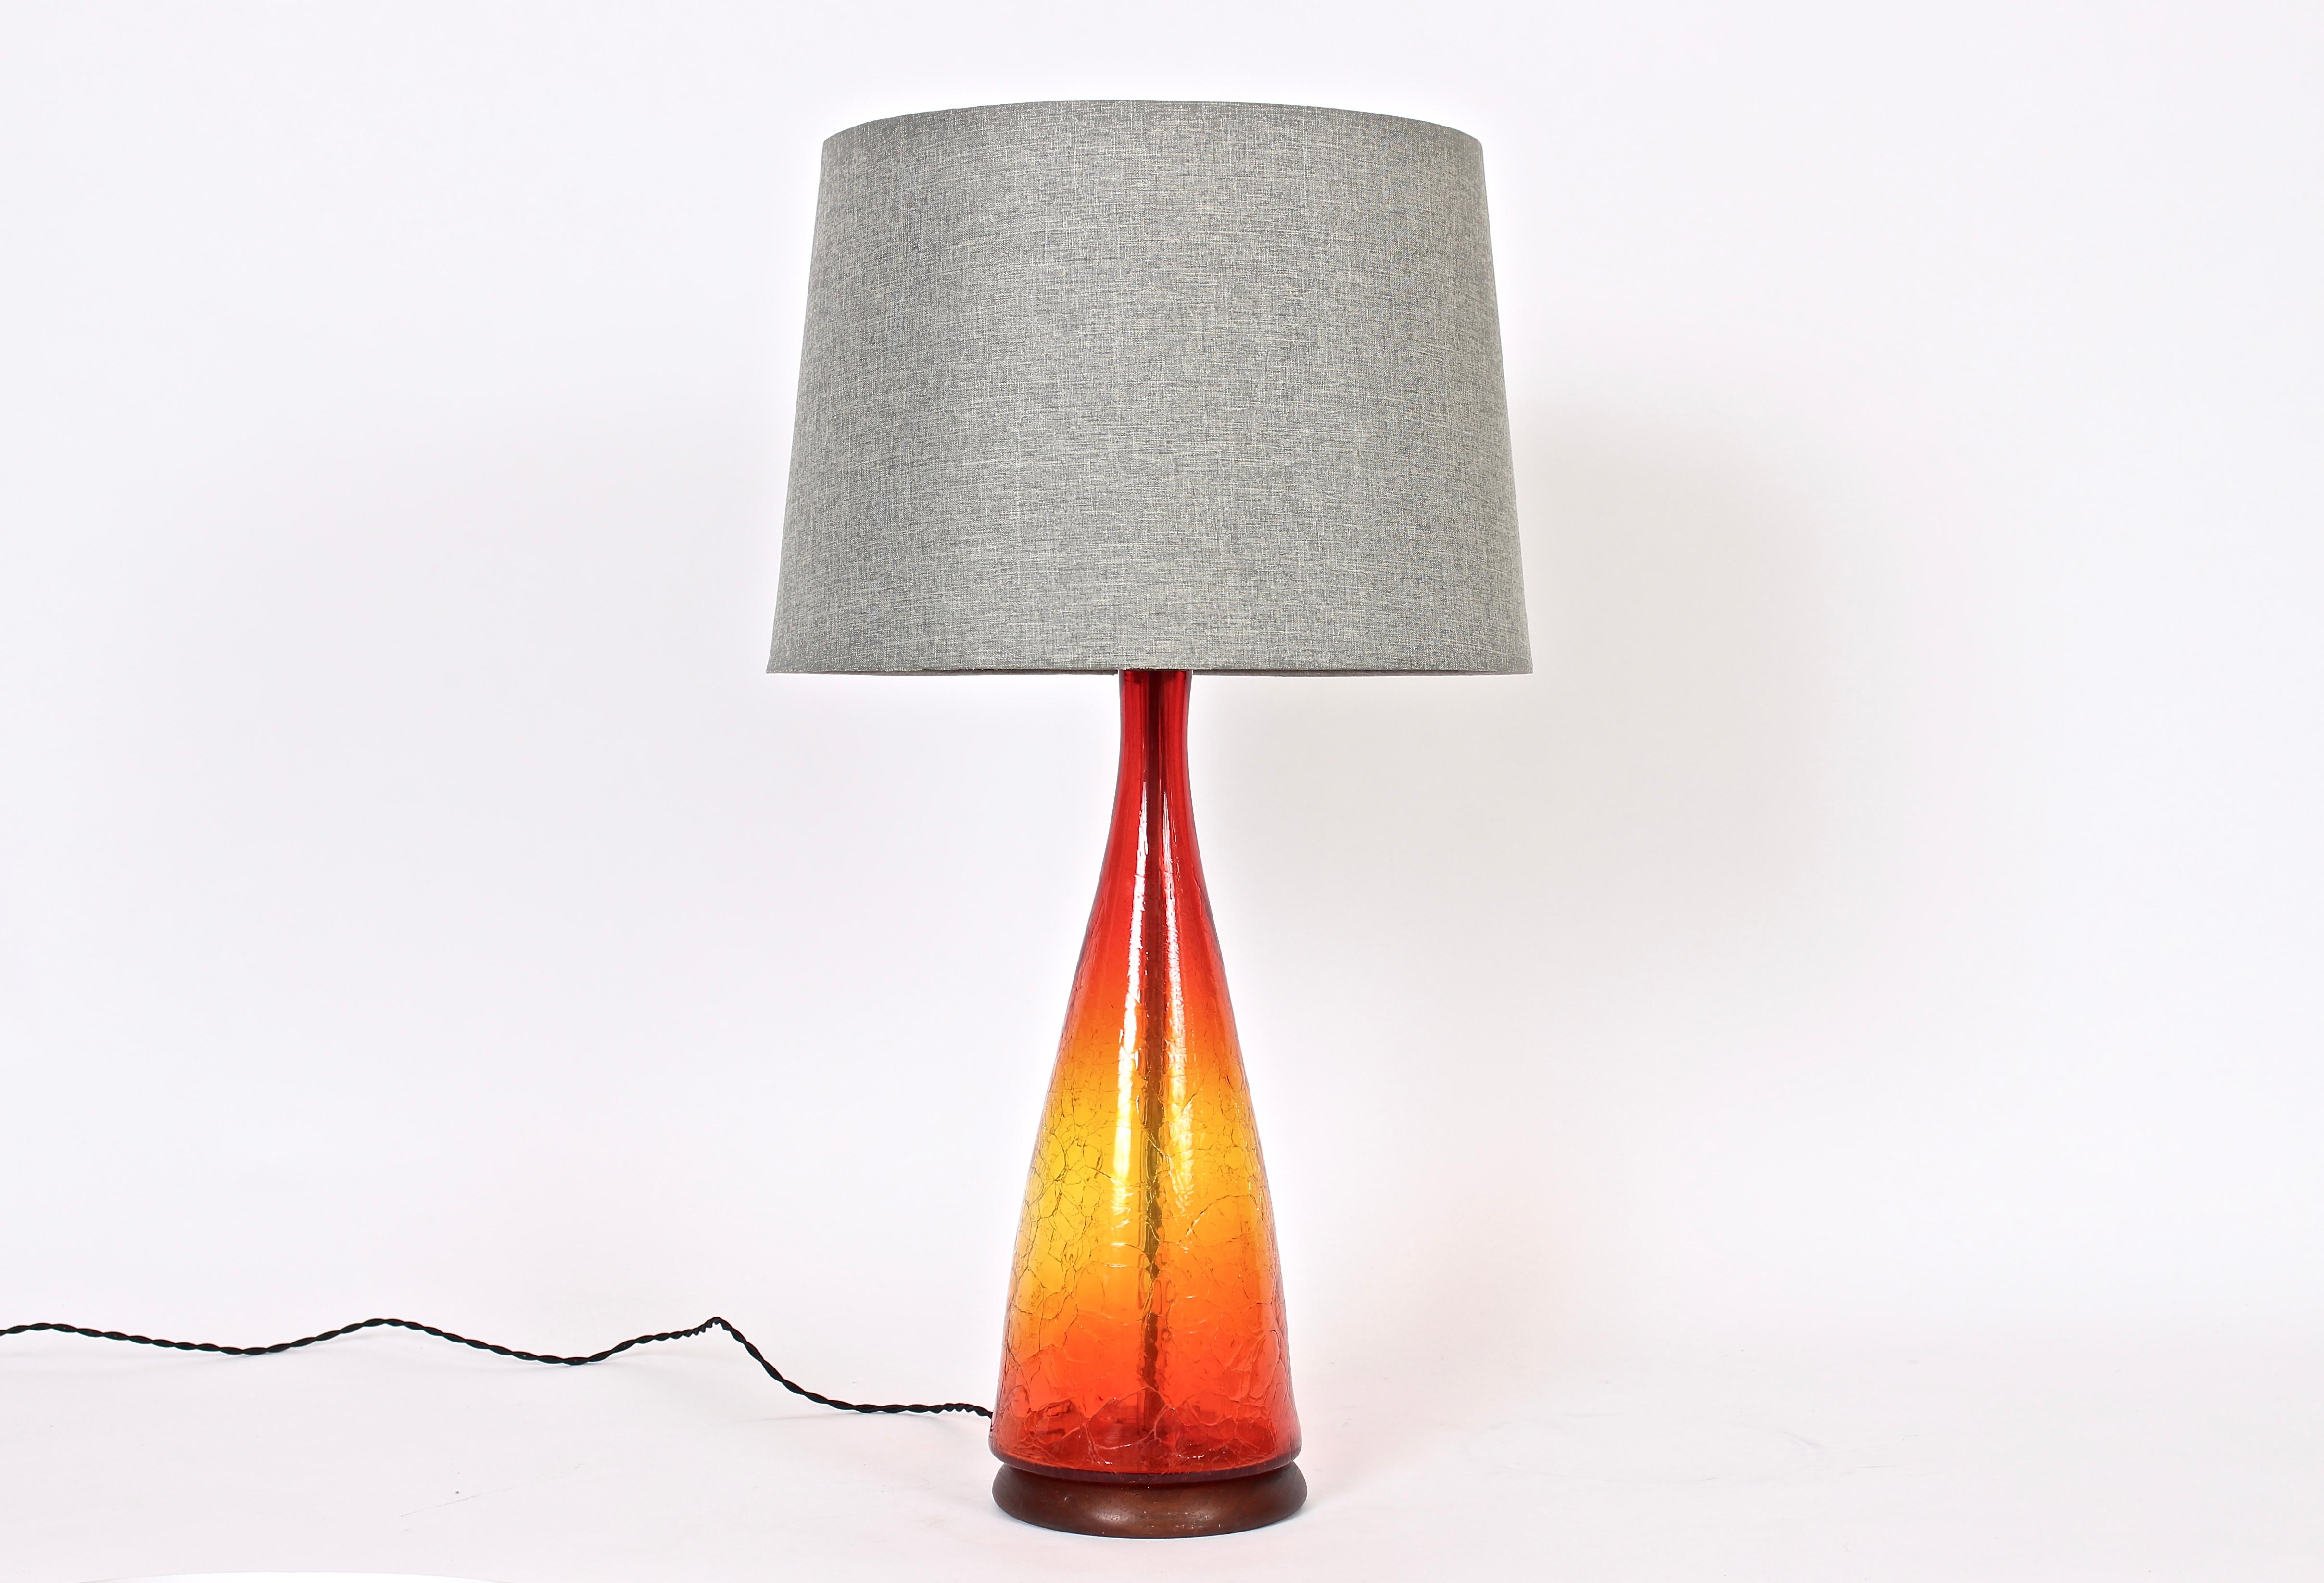 American mid century hand blown crackle glass lamp by Blenko glass company. Featuring a classic decanter form in translucent crackled glass with bright red, orange and yellow sunset coloration. On rounded solid coated wooden base. Shade shown for